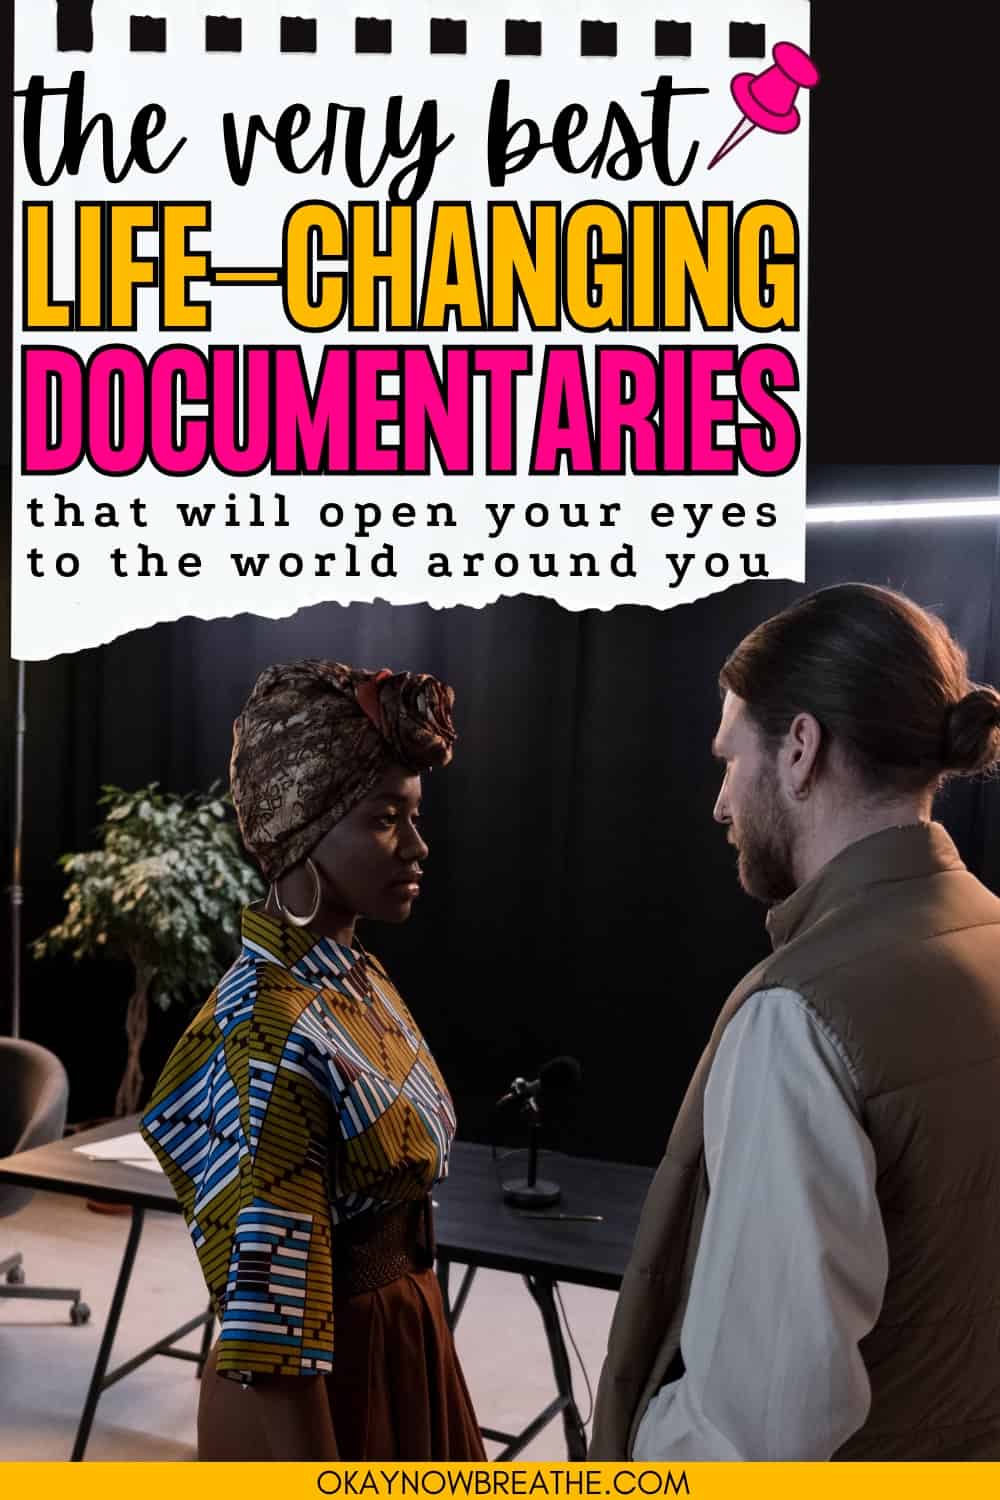 There is a white man face to face with a Black woman from Africa. It looks like they're in the middle of a conversation. Above, there is text that says: the very best life-changing documentaries that will open your eyes to the world around you.